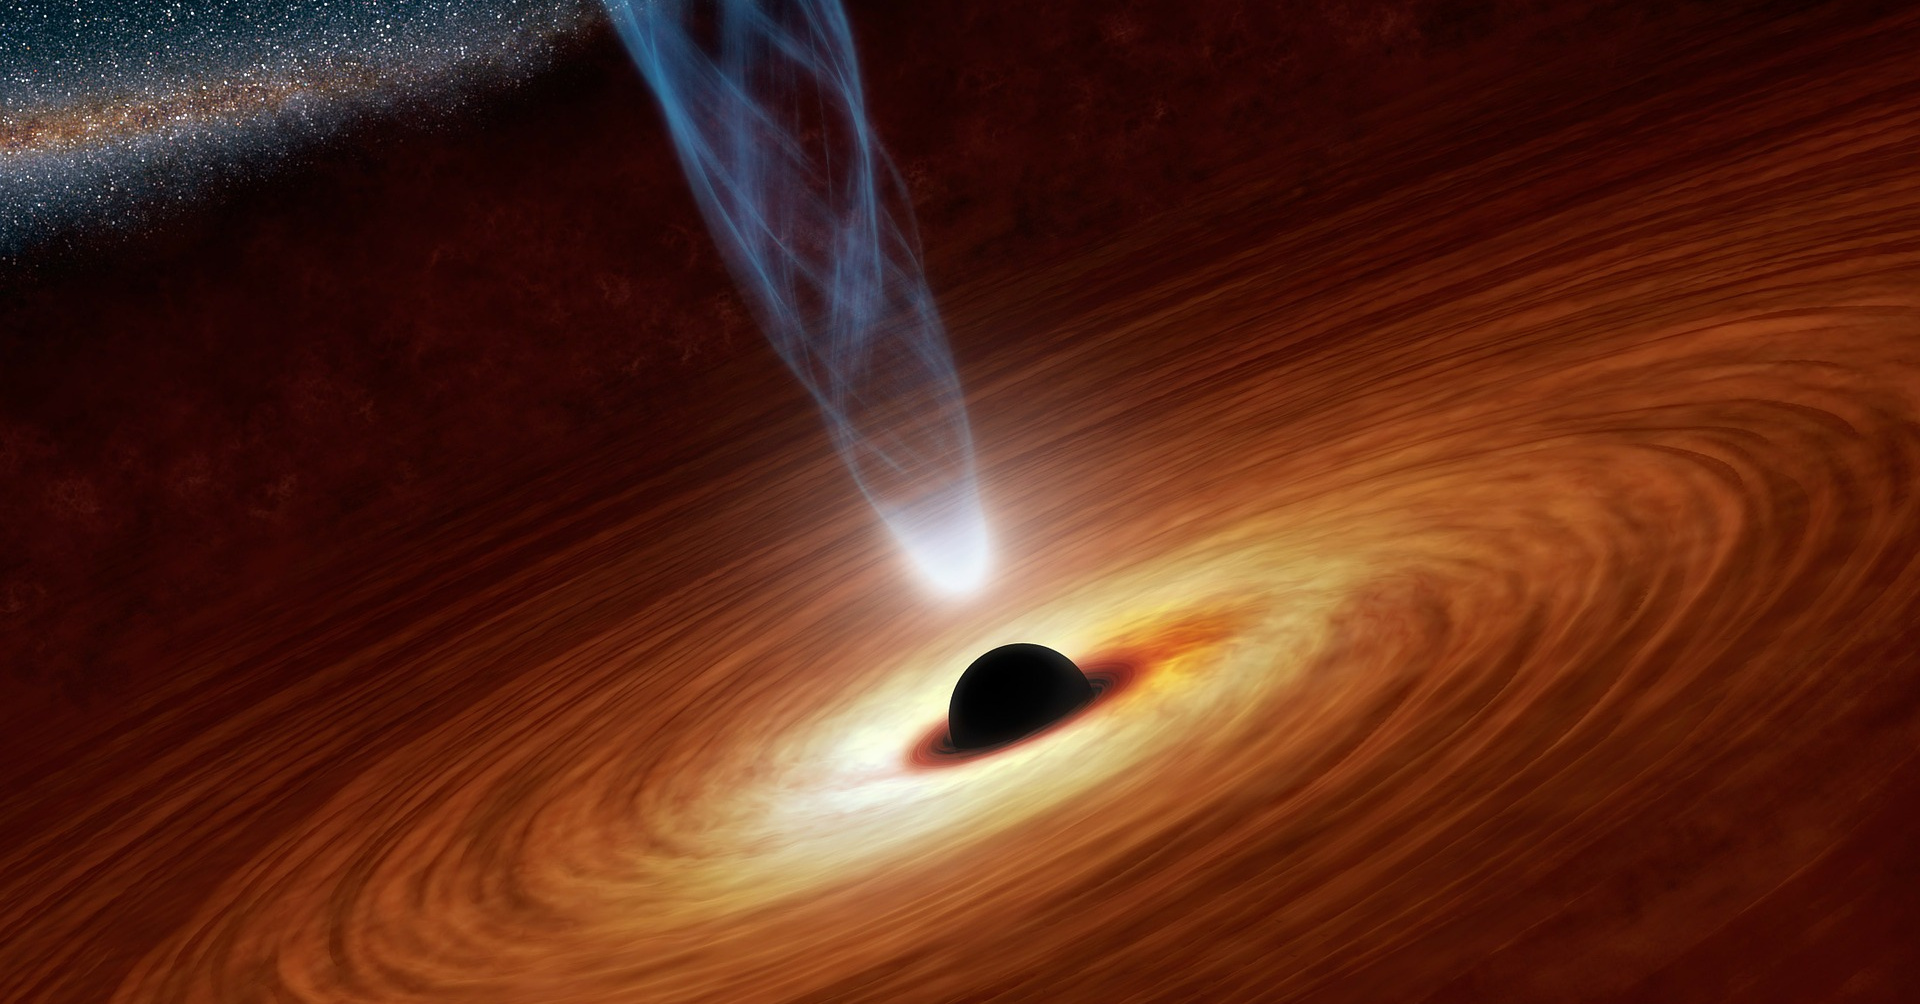 The big question for science: the black hole